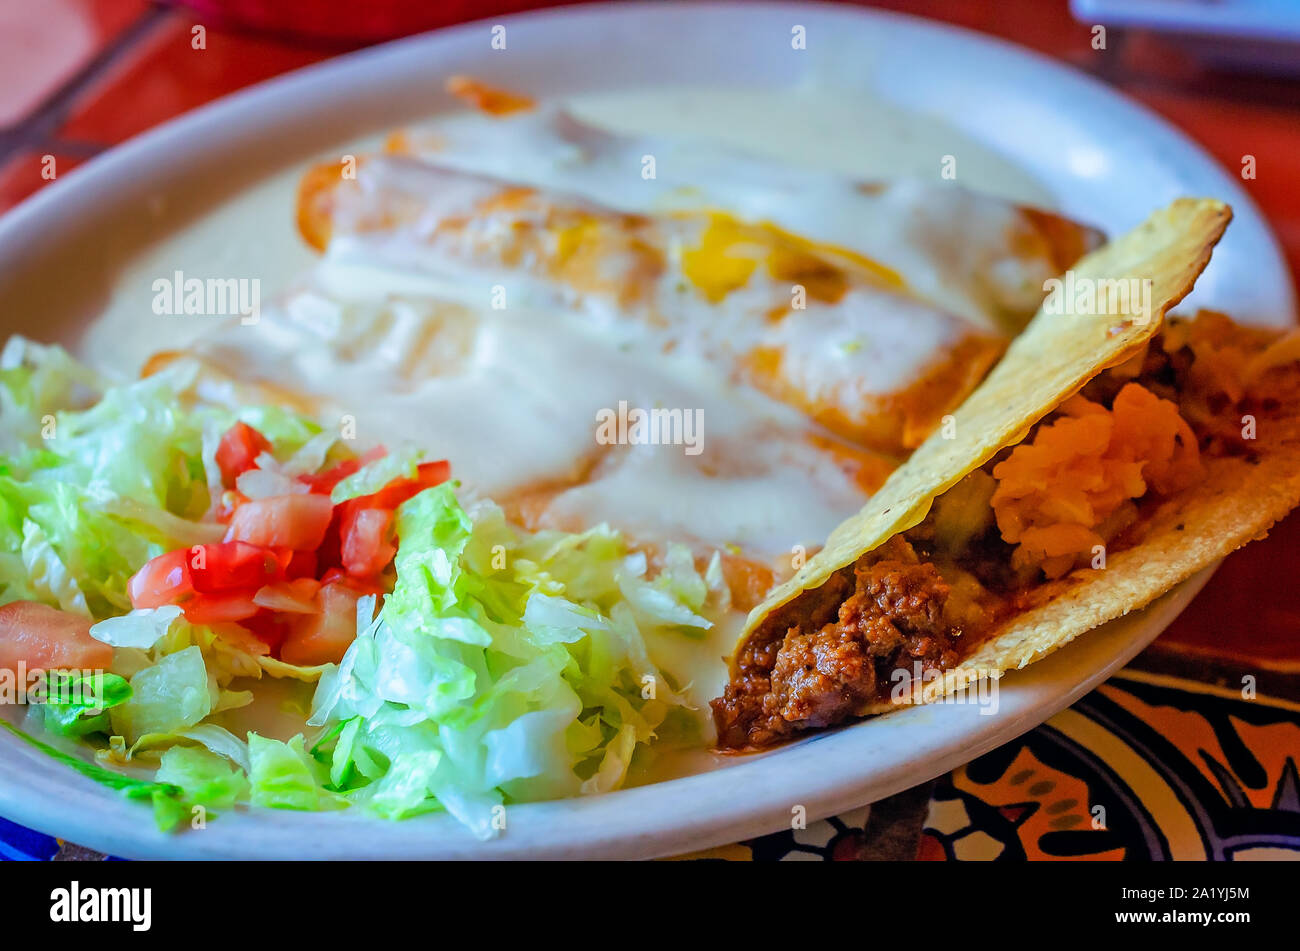 A crunchy taco is served alongside enchiladas, Aug. 16, 2019, at Fernando’s in Magee, Mississippi. Stock Photo